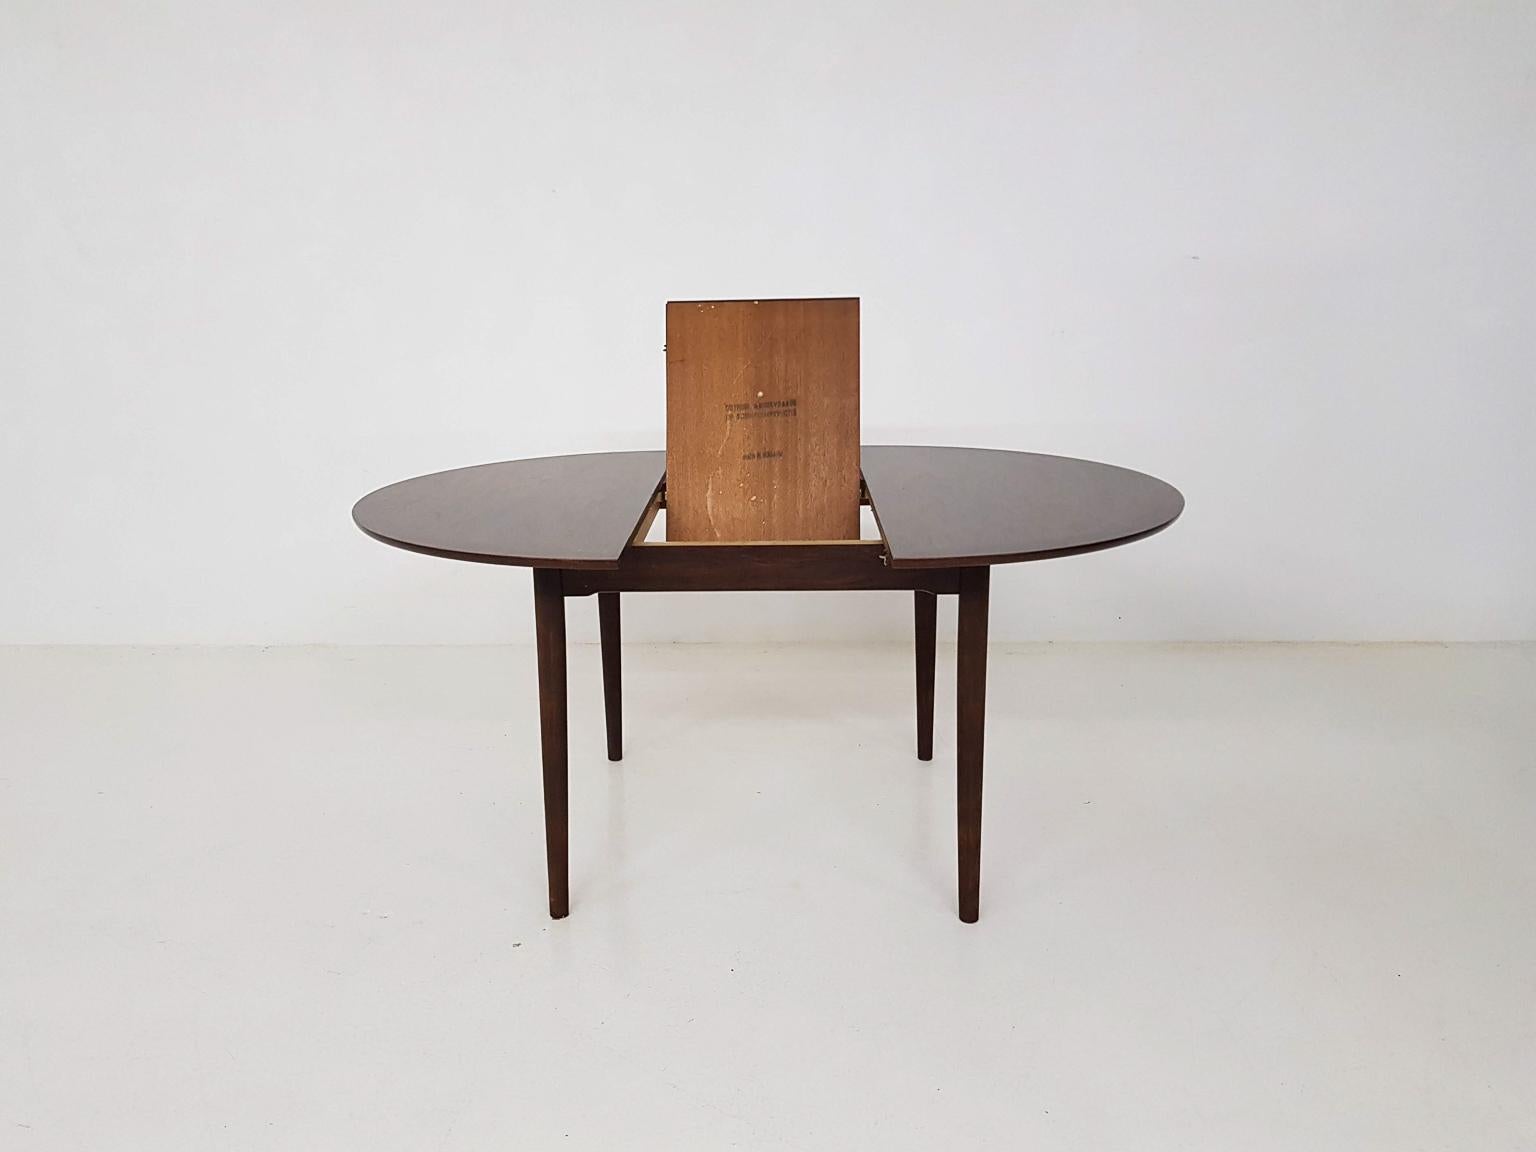 Veneer Rosewood Mid-Century Modern Set of Dining Table and Chairs, Dutch Design 1960s